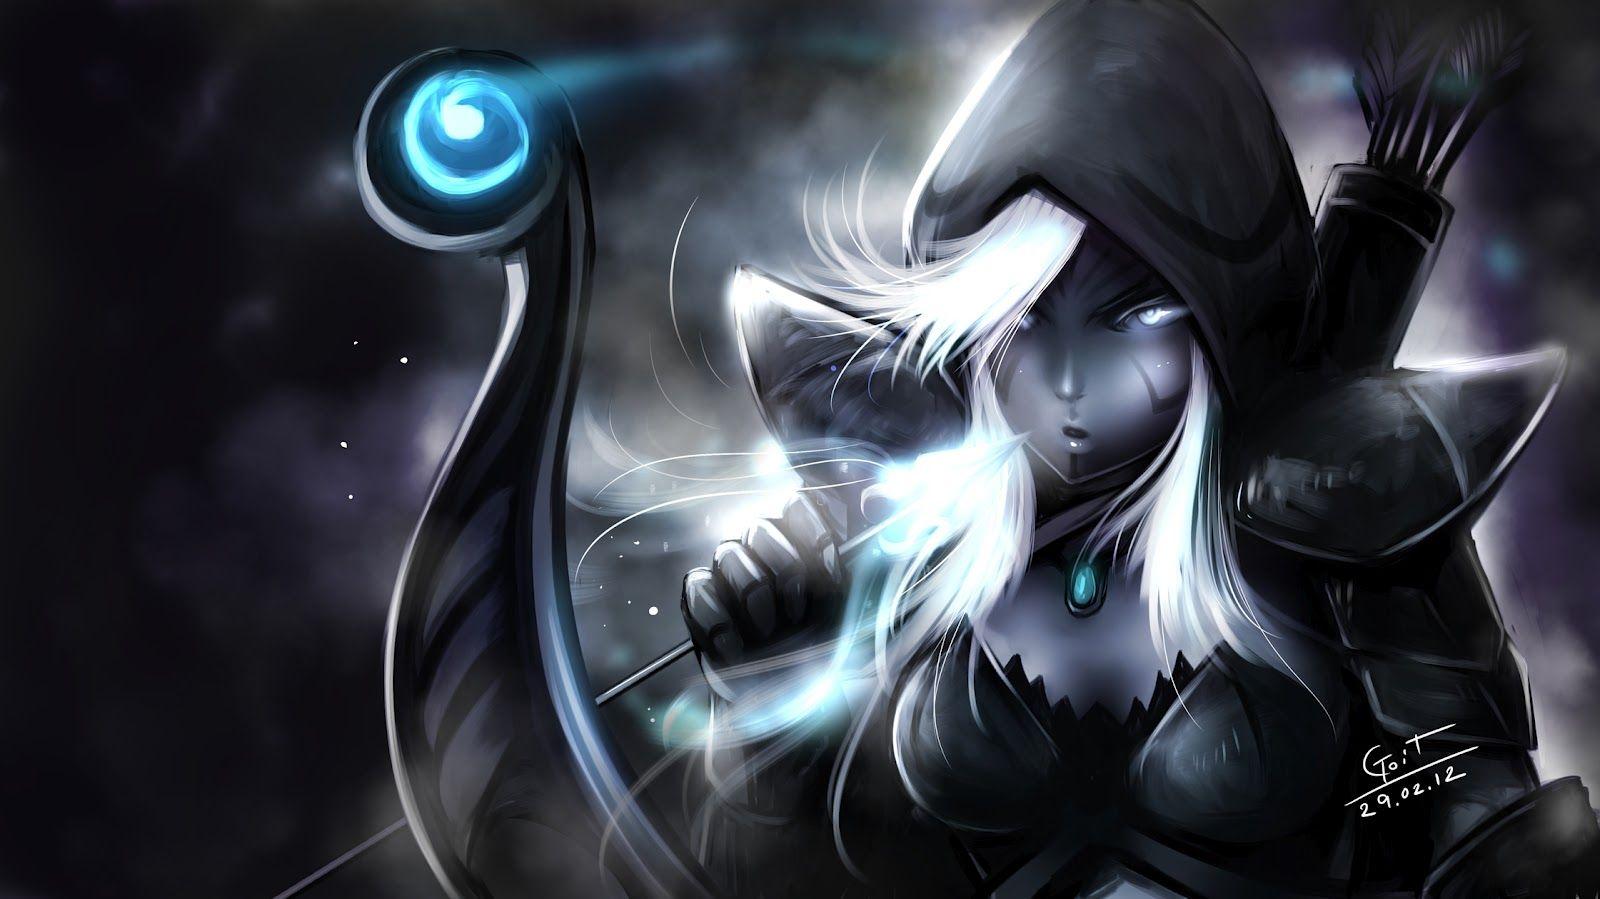 Drow Ranger image Drow Ranger HD wallpaper and background photo